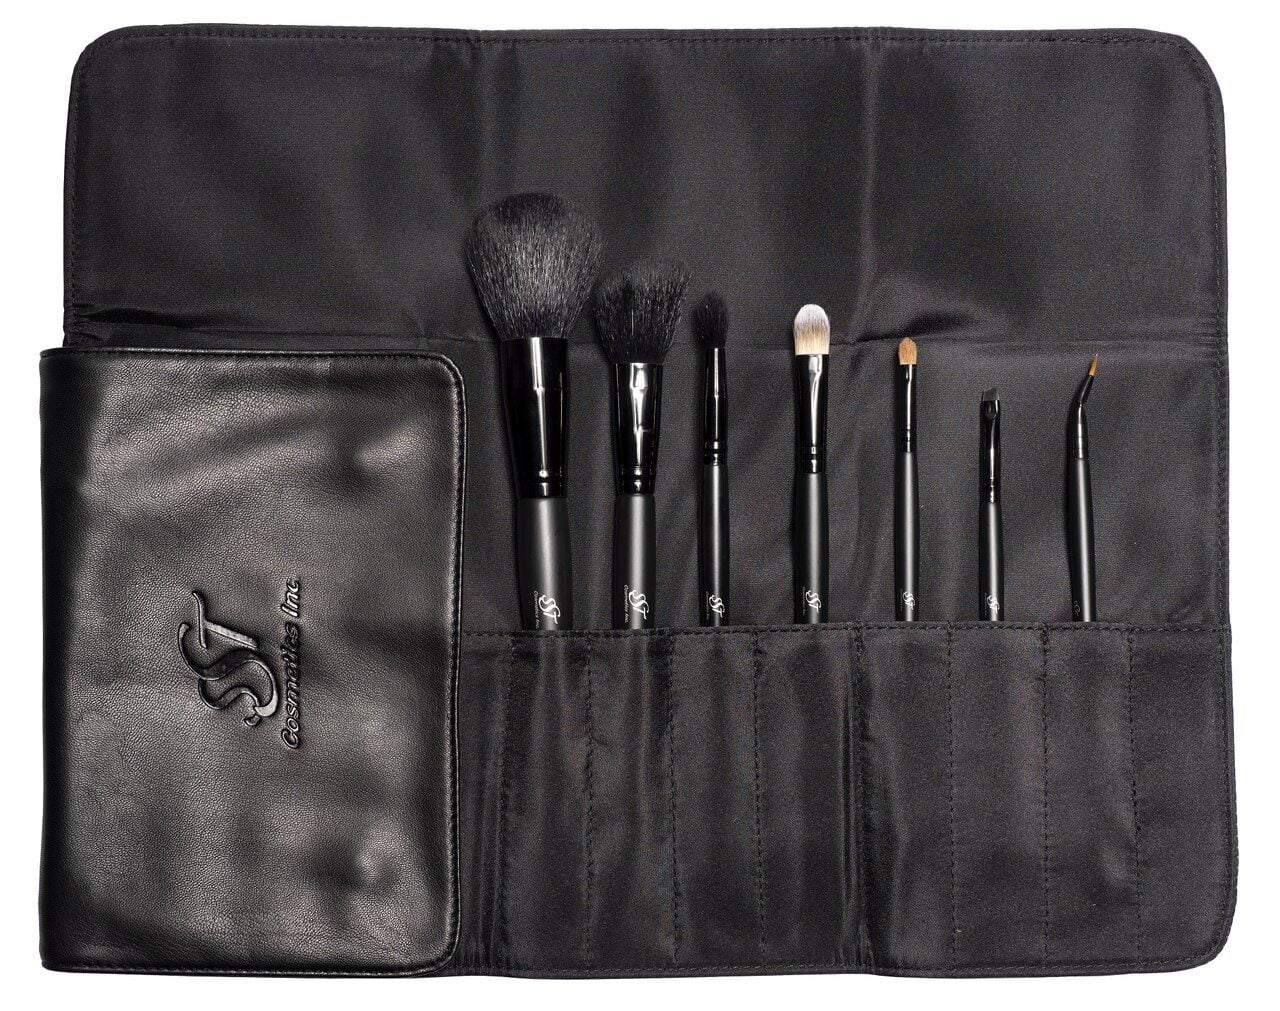 Introductory Brush Set (7 Piece)